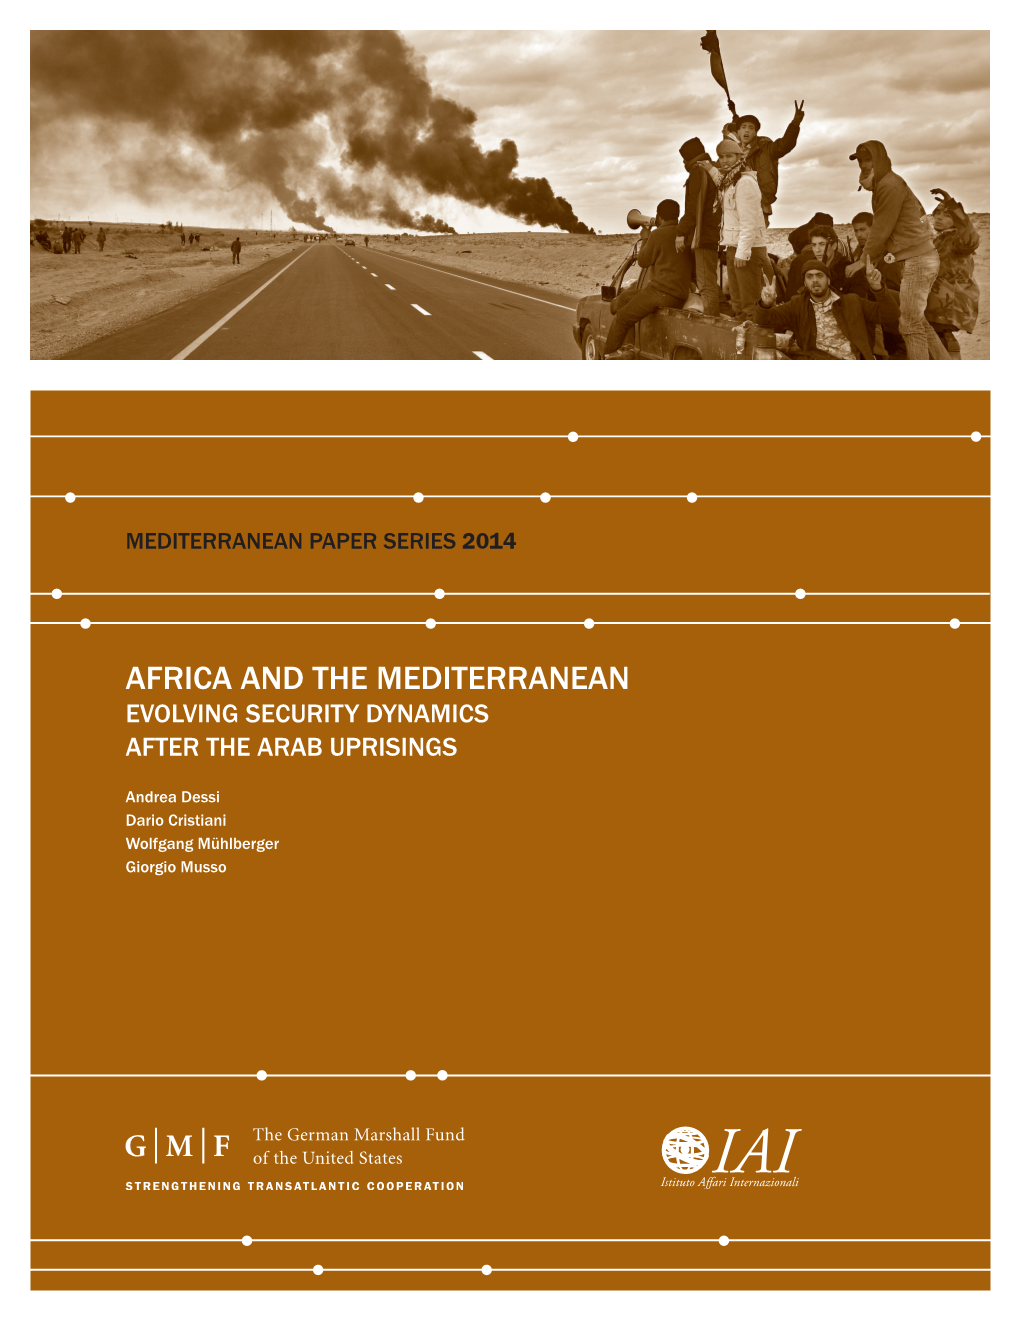 Africa and the Mediterranean. Evolving Security Dynamics After the Arab Uprisings